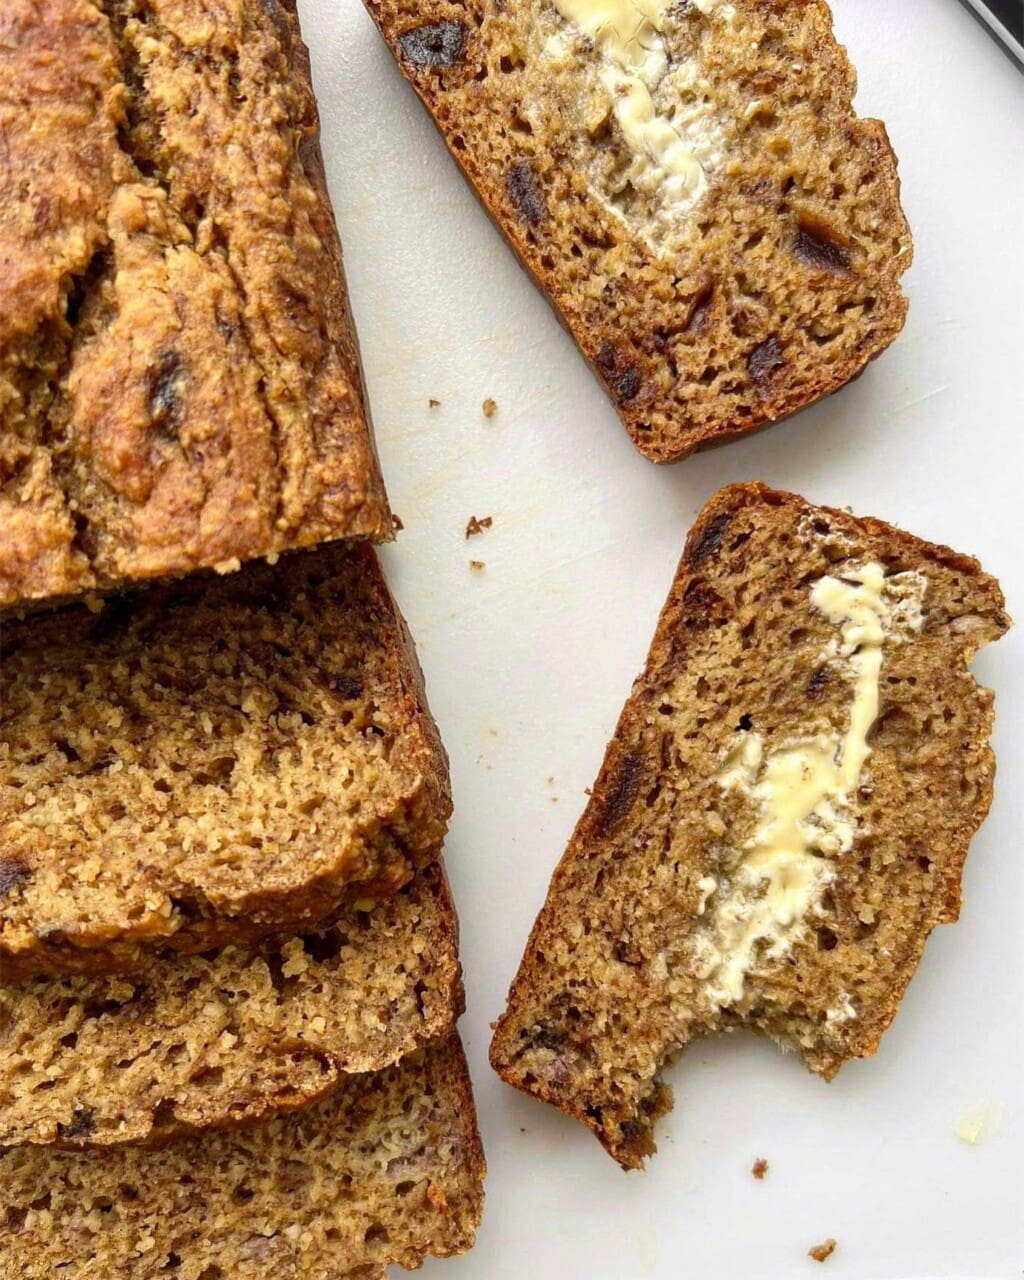 A close up of sliced of banana date loaf slathered with butter.